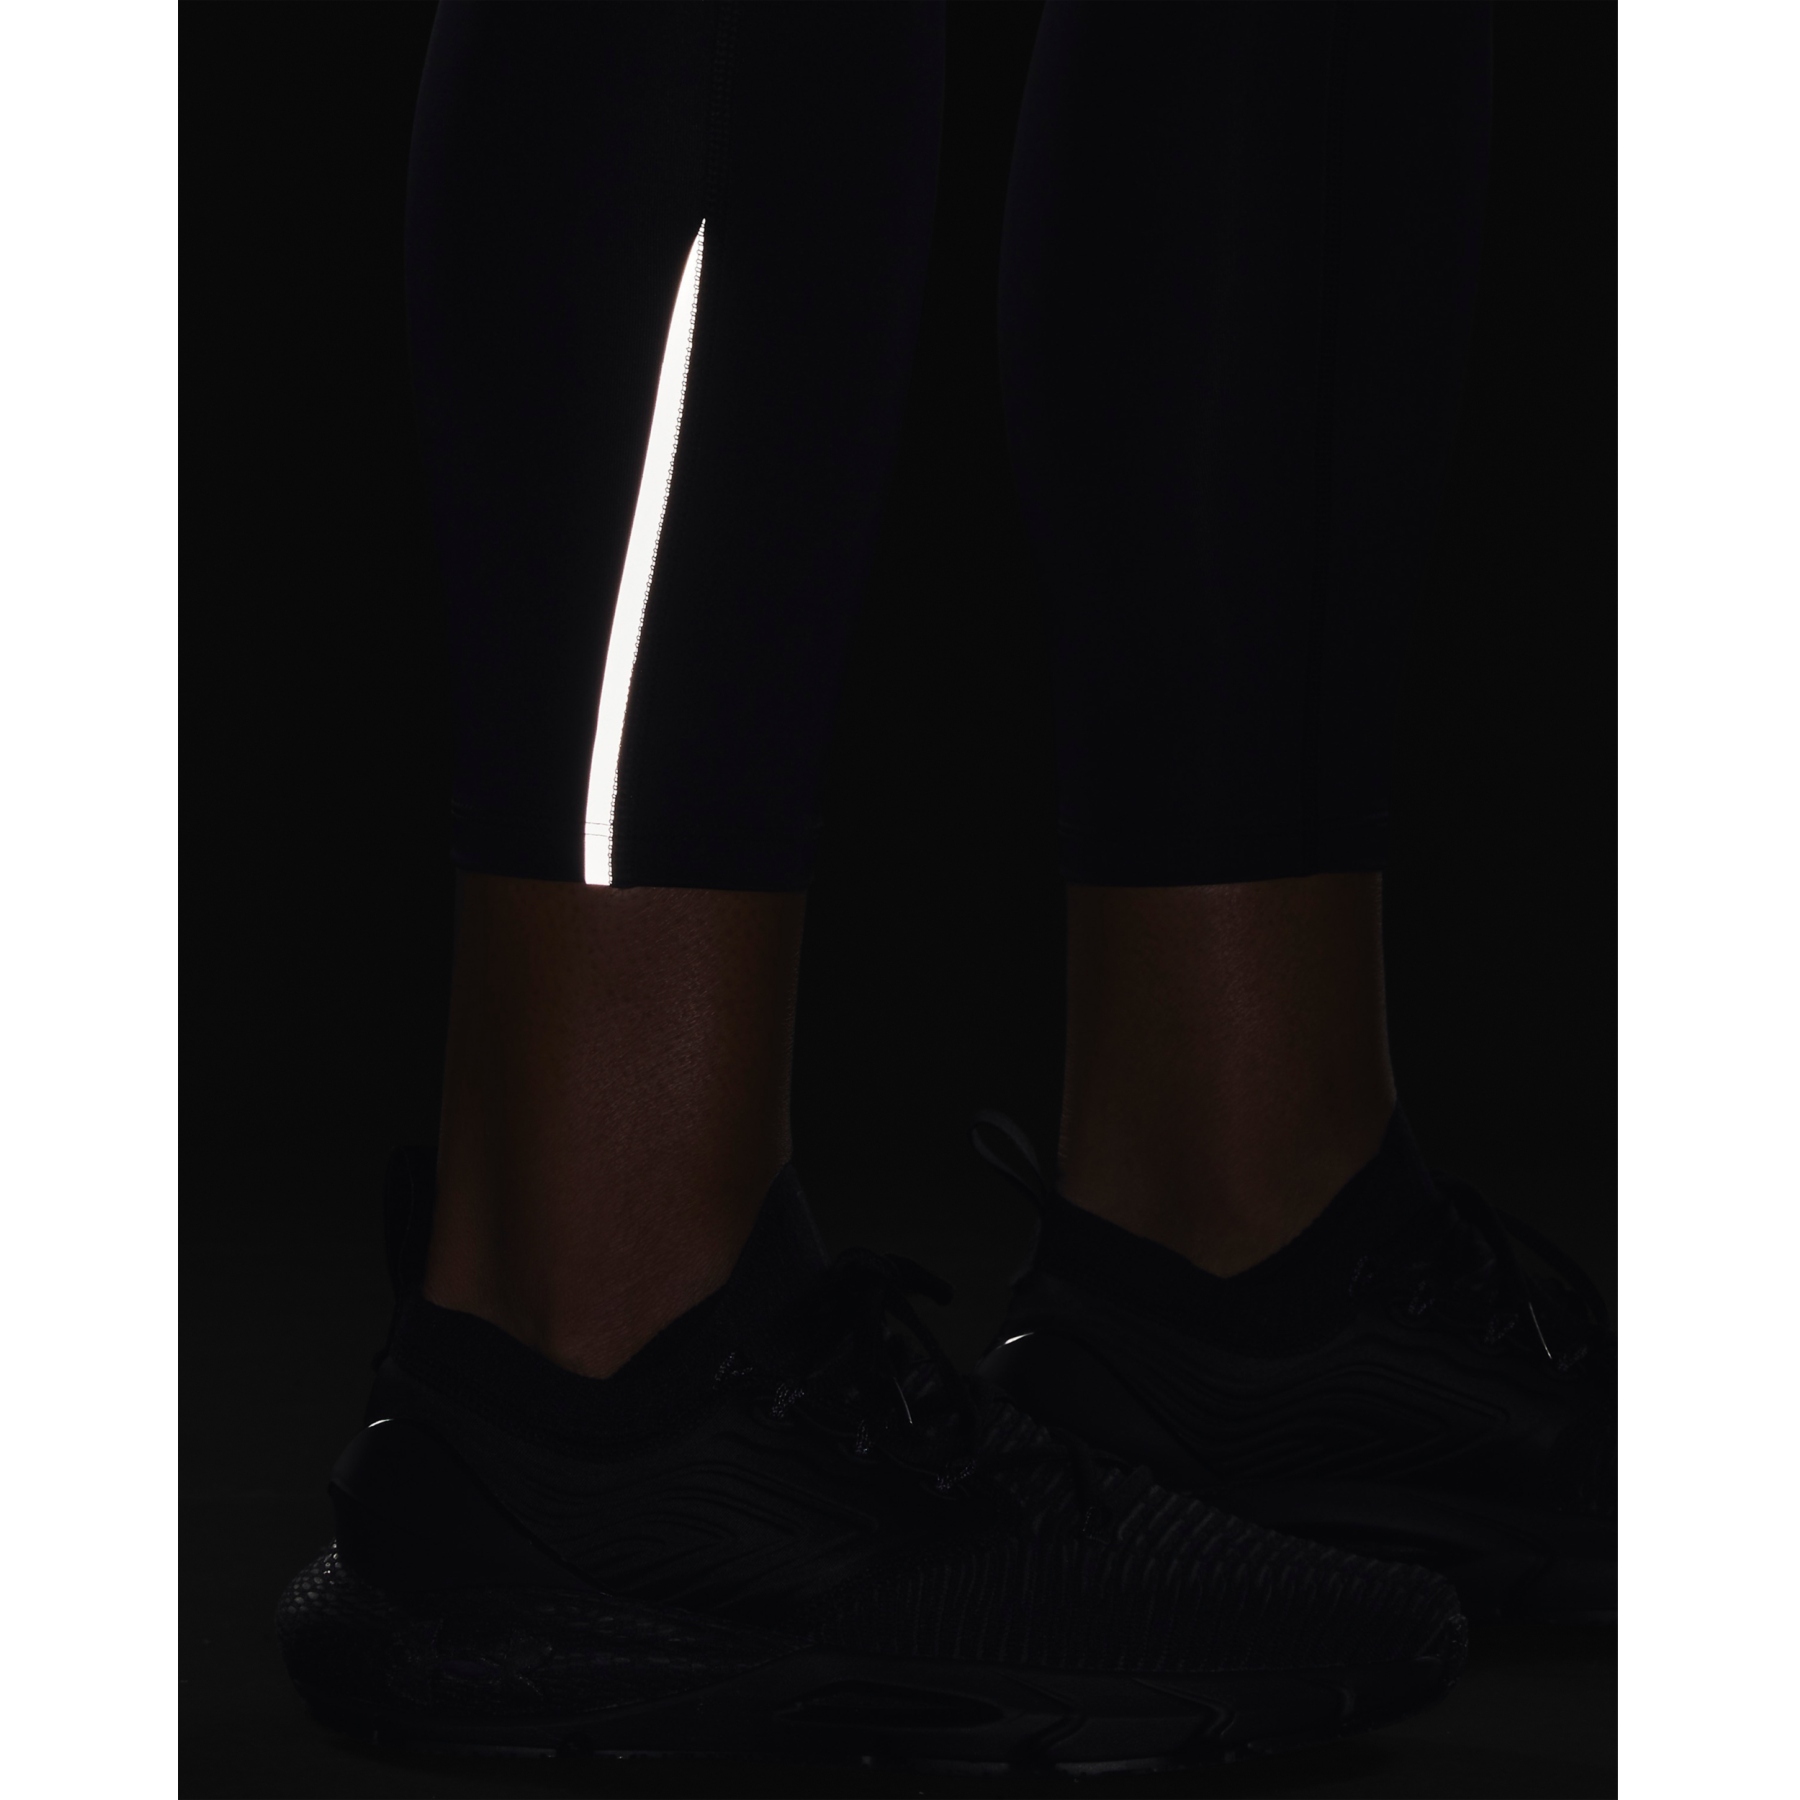 Under Armour FLY FAST ANKLE - Leggings - harbor blue/reflective